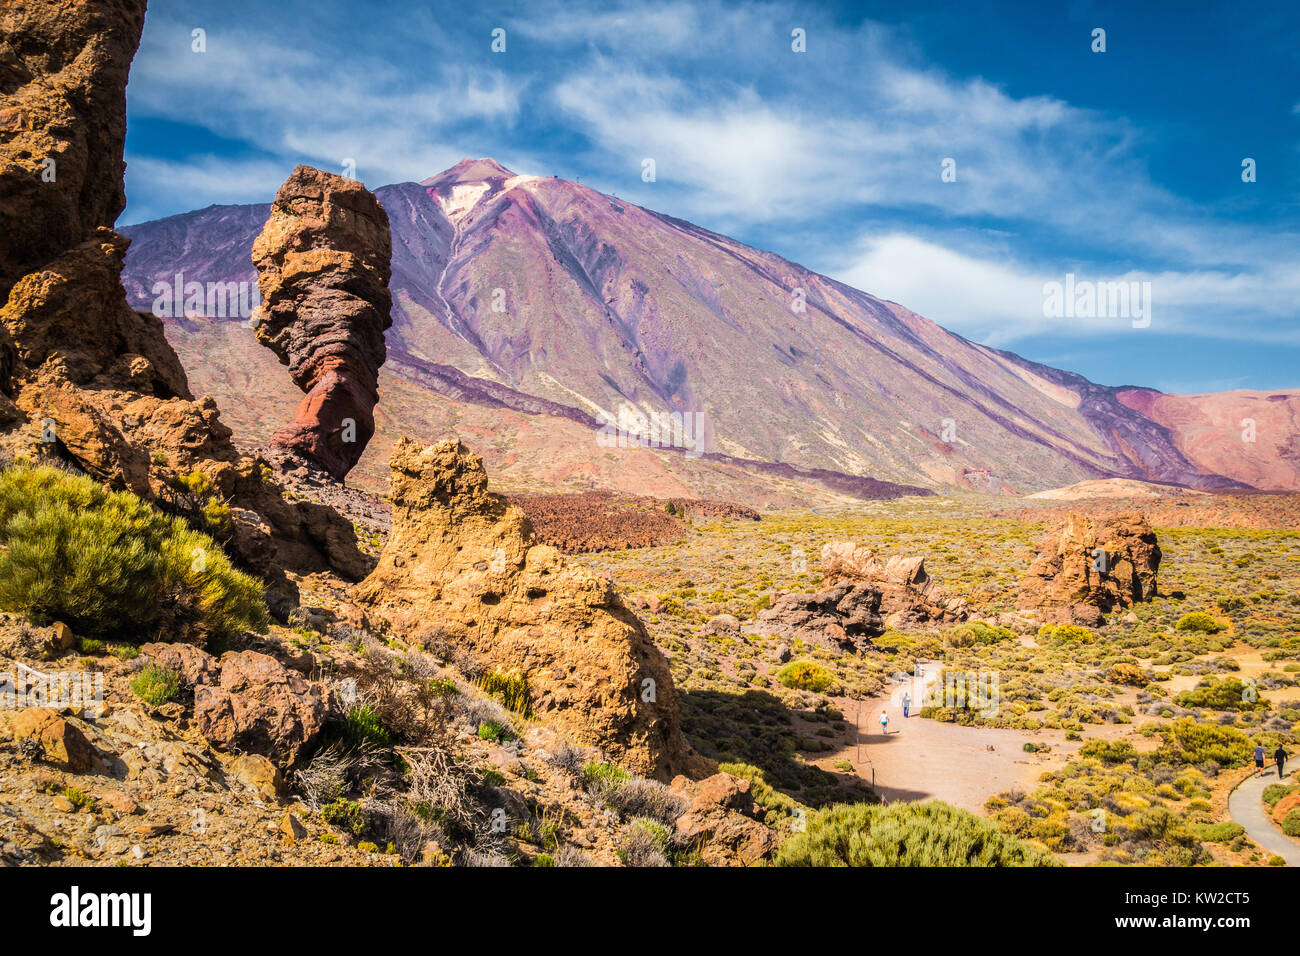 Famous Roque Cinchado unique rock formation with famous Pico del Teide mountain volcano summit in the background on a sunny day, Tenerife, Canaries Stock Photo